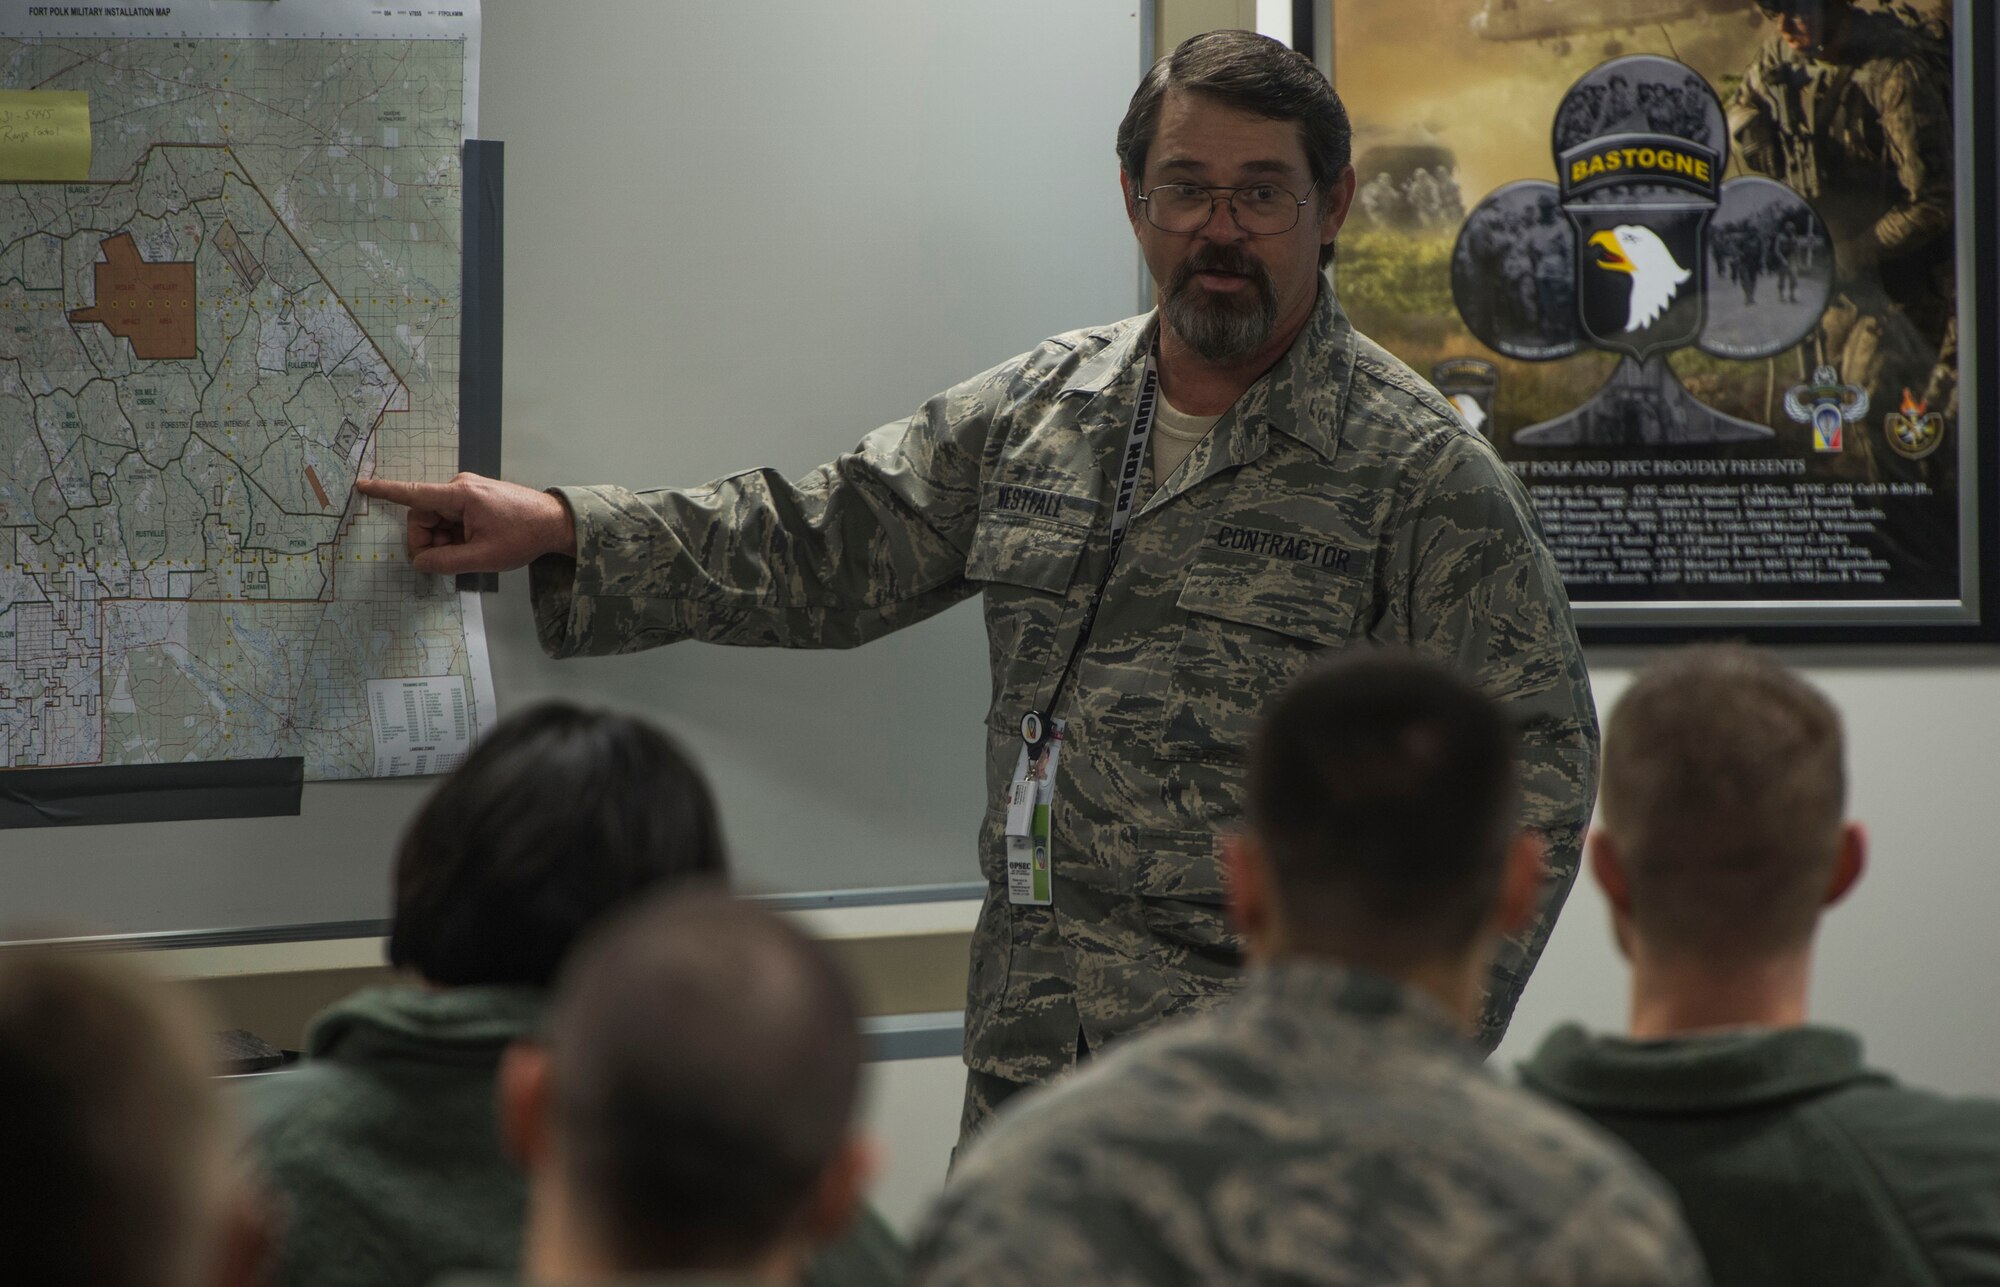 Bart Westfall, 34th Combat Training Squadron exercise planner assigned to Little Rock Air Force Base, Ark., briefs members of the 817th Contingency Response Group in a classroom before an exercise at the Joint Readiness Training Center at Fort Polk, La., Jan. 14, 2015. JRTC is a 34 CTS exercise for the U.S. Army that improves unit readiness by providing realistic, stressful, joint and combined arms training across the full spectrum of conflict. The Airmen helped support the exercise, and also provided an opportunity for internal training. (U.S. Air Force photo/Staff Sgt. Gustavo Gonzalez/RELEASED)